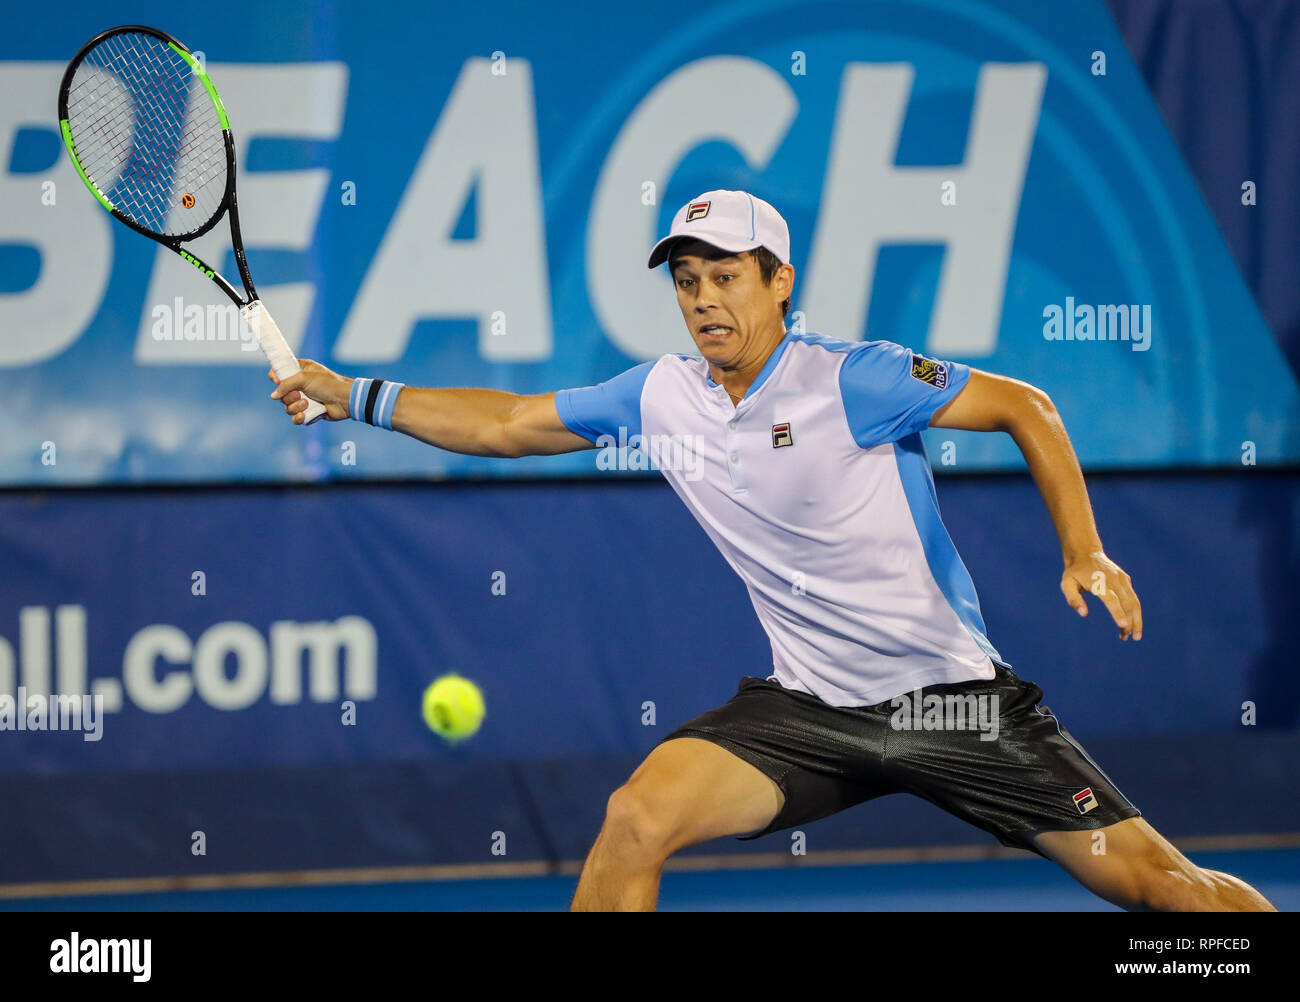 Delray Beach open, Florida, USA. February 2l, 2019: Mackenzie McDonald, of  the United States, runs for the ball during a quarterfinal round against  Guillermo Garcia-Lopez, of Spain, at the 2019 Delray Beach